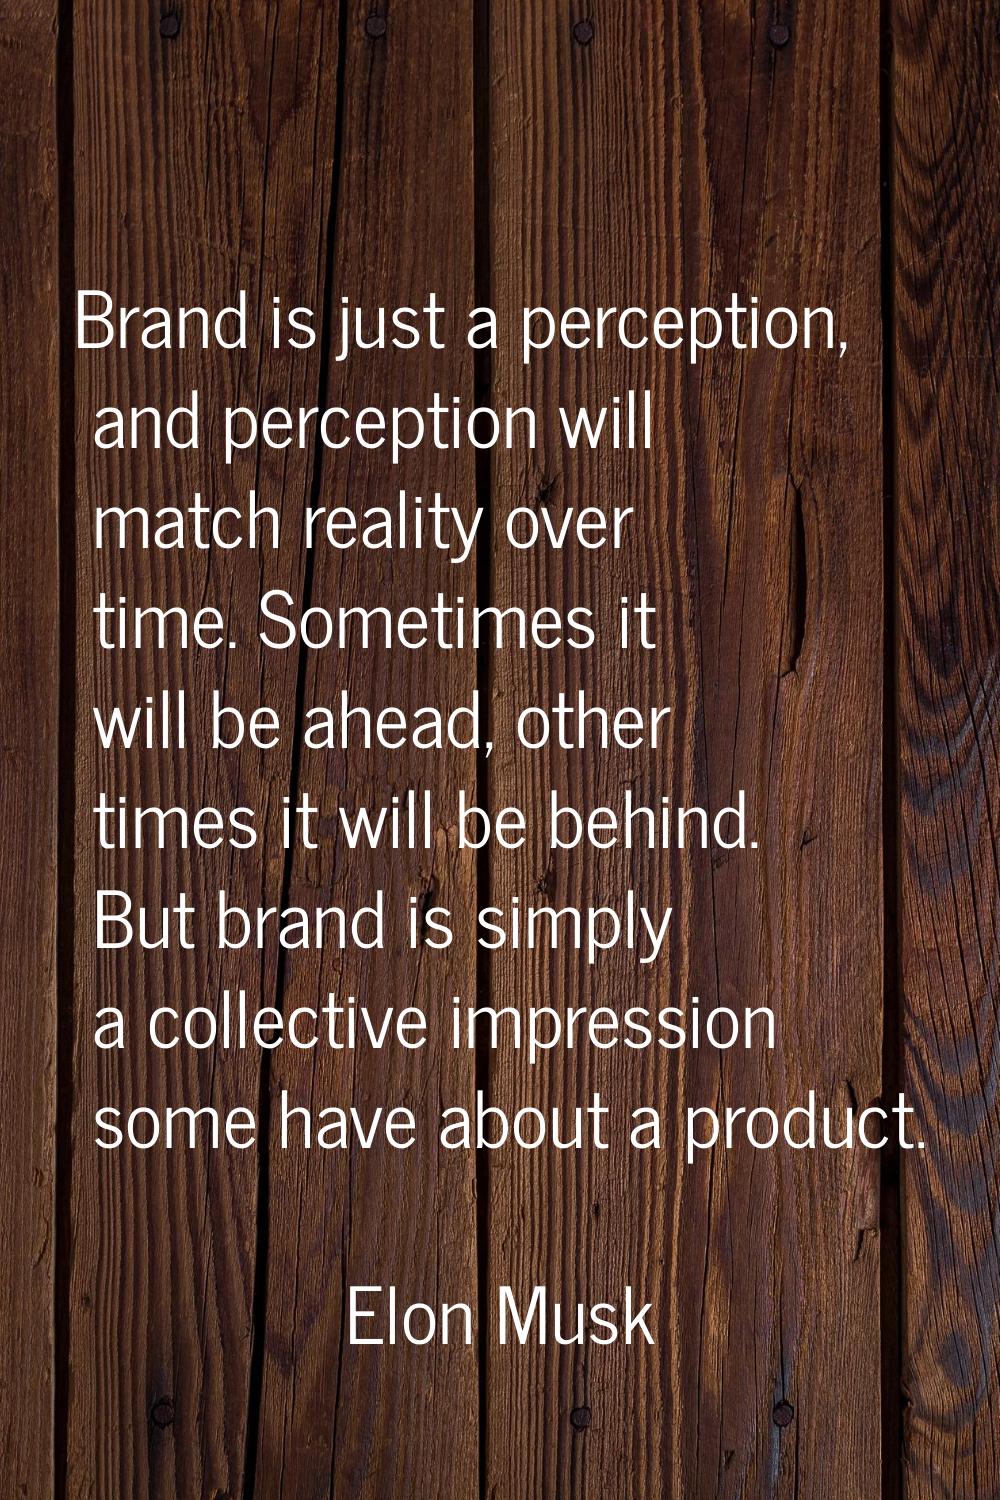 Brand is just a perception, and perception will match reality over time. Sometimes it will be ahead